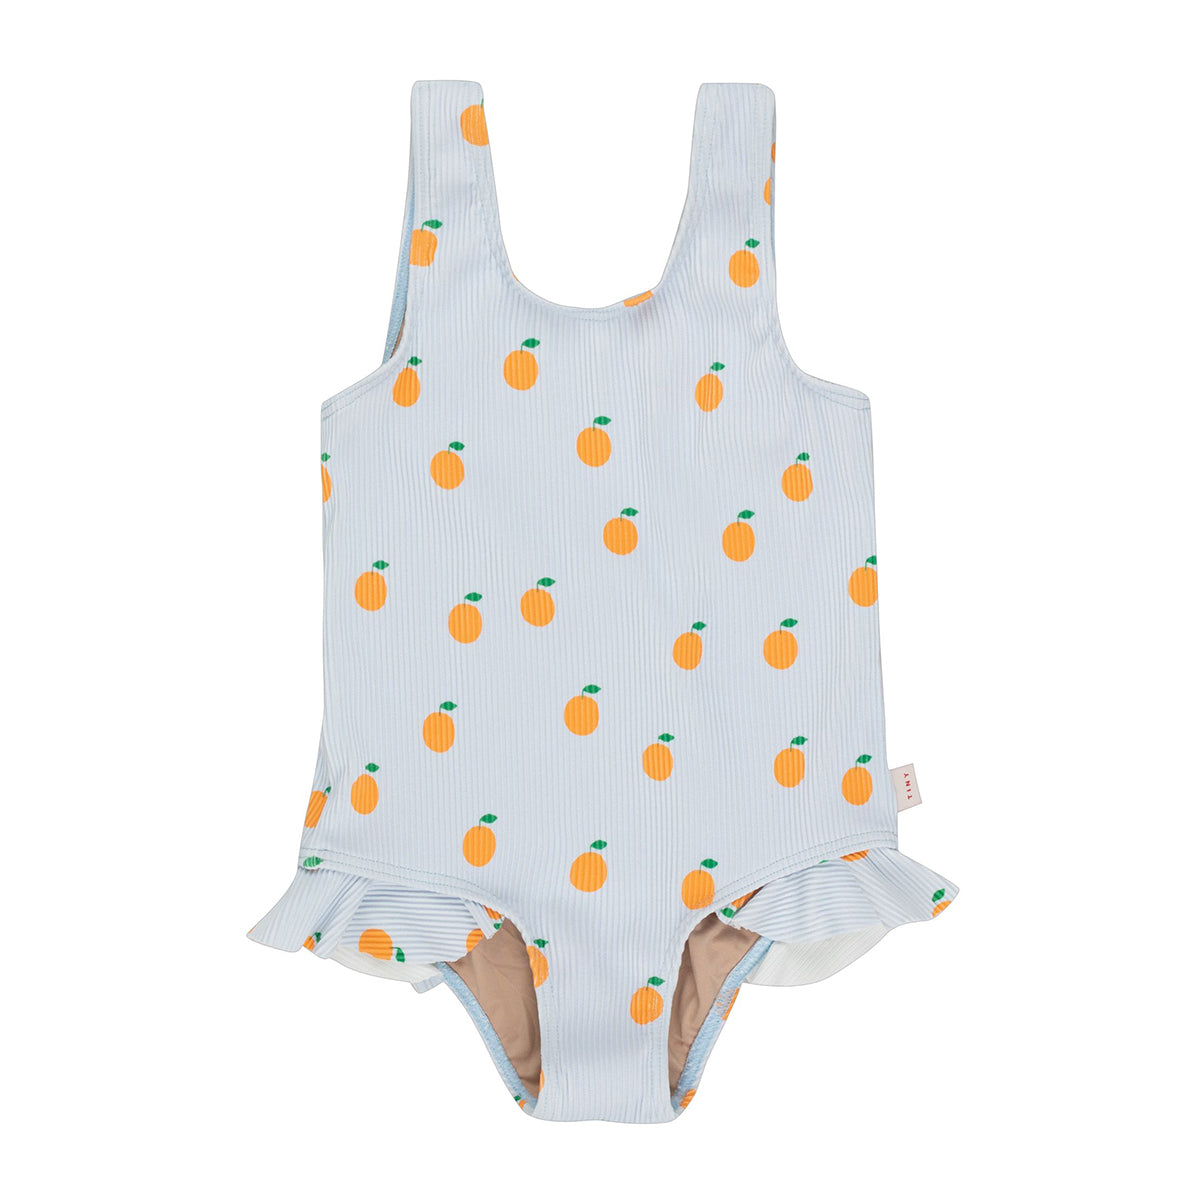 Tinycottons Tiny Cottons Oranges Frills Swimsuit